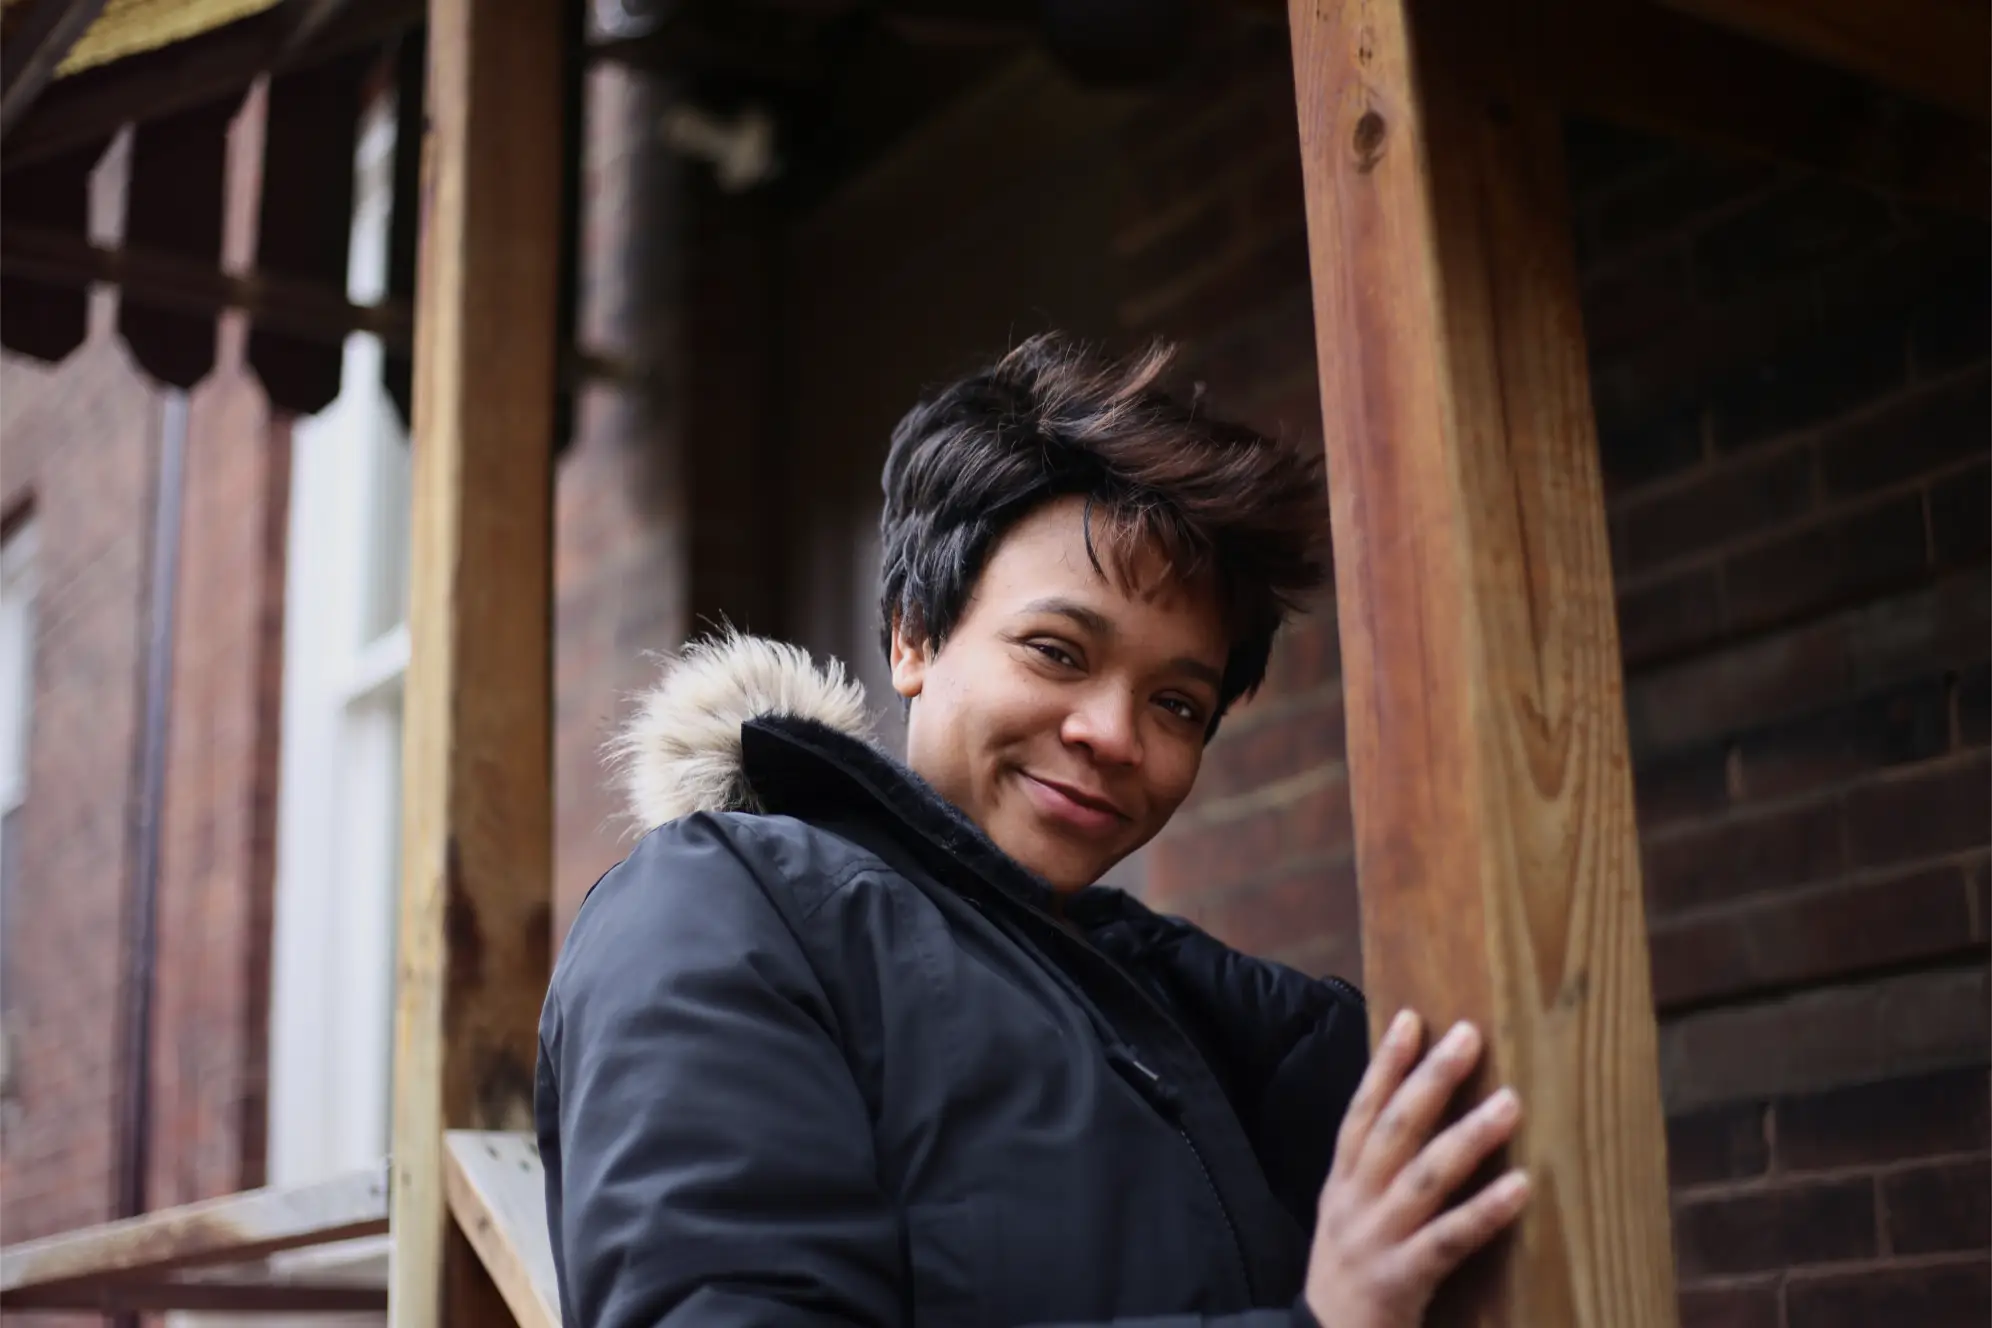 Young woman in winter jacket with short brown hair smiling down at the camera